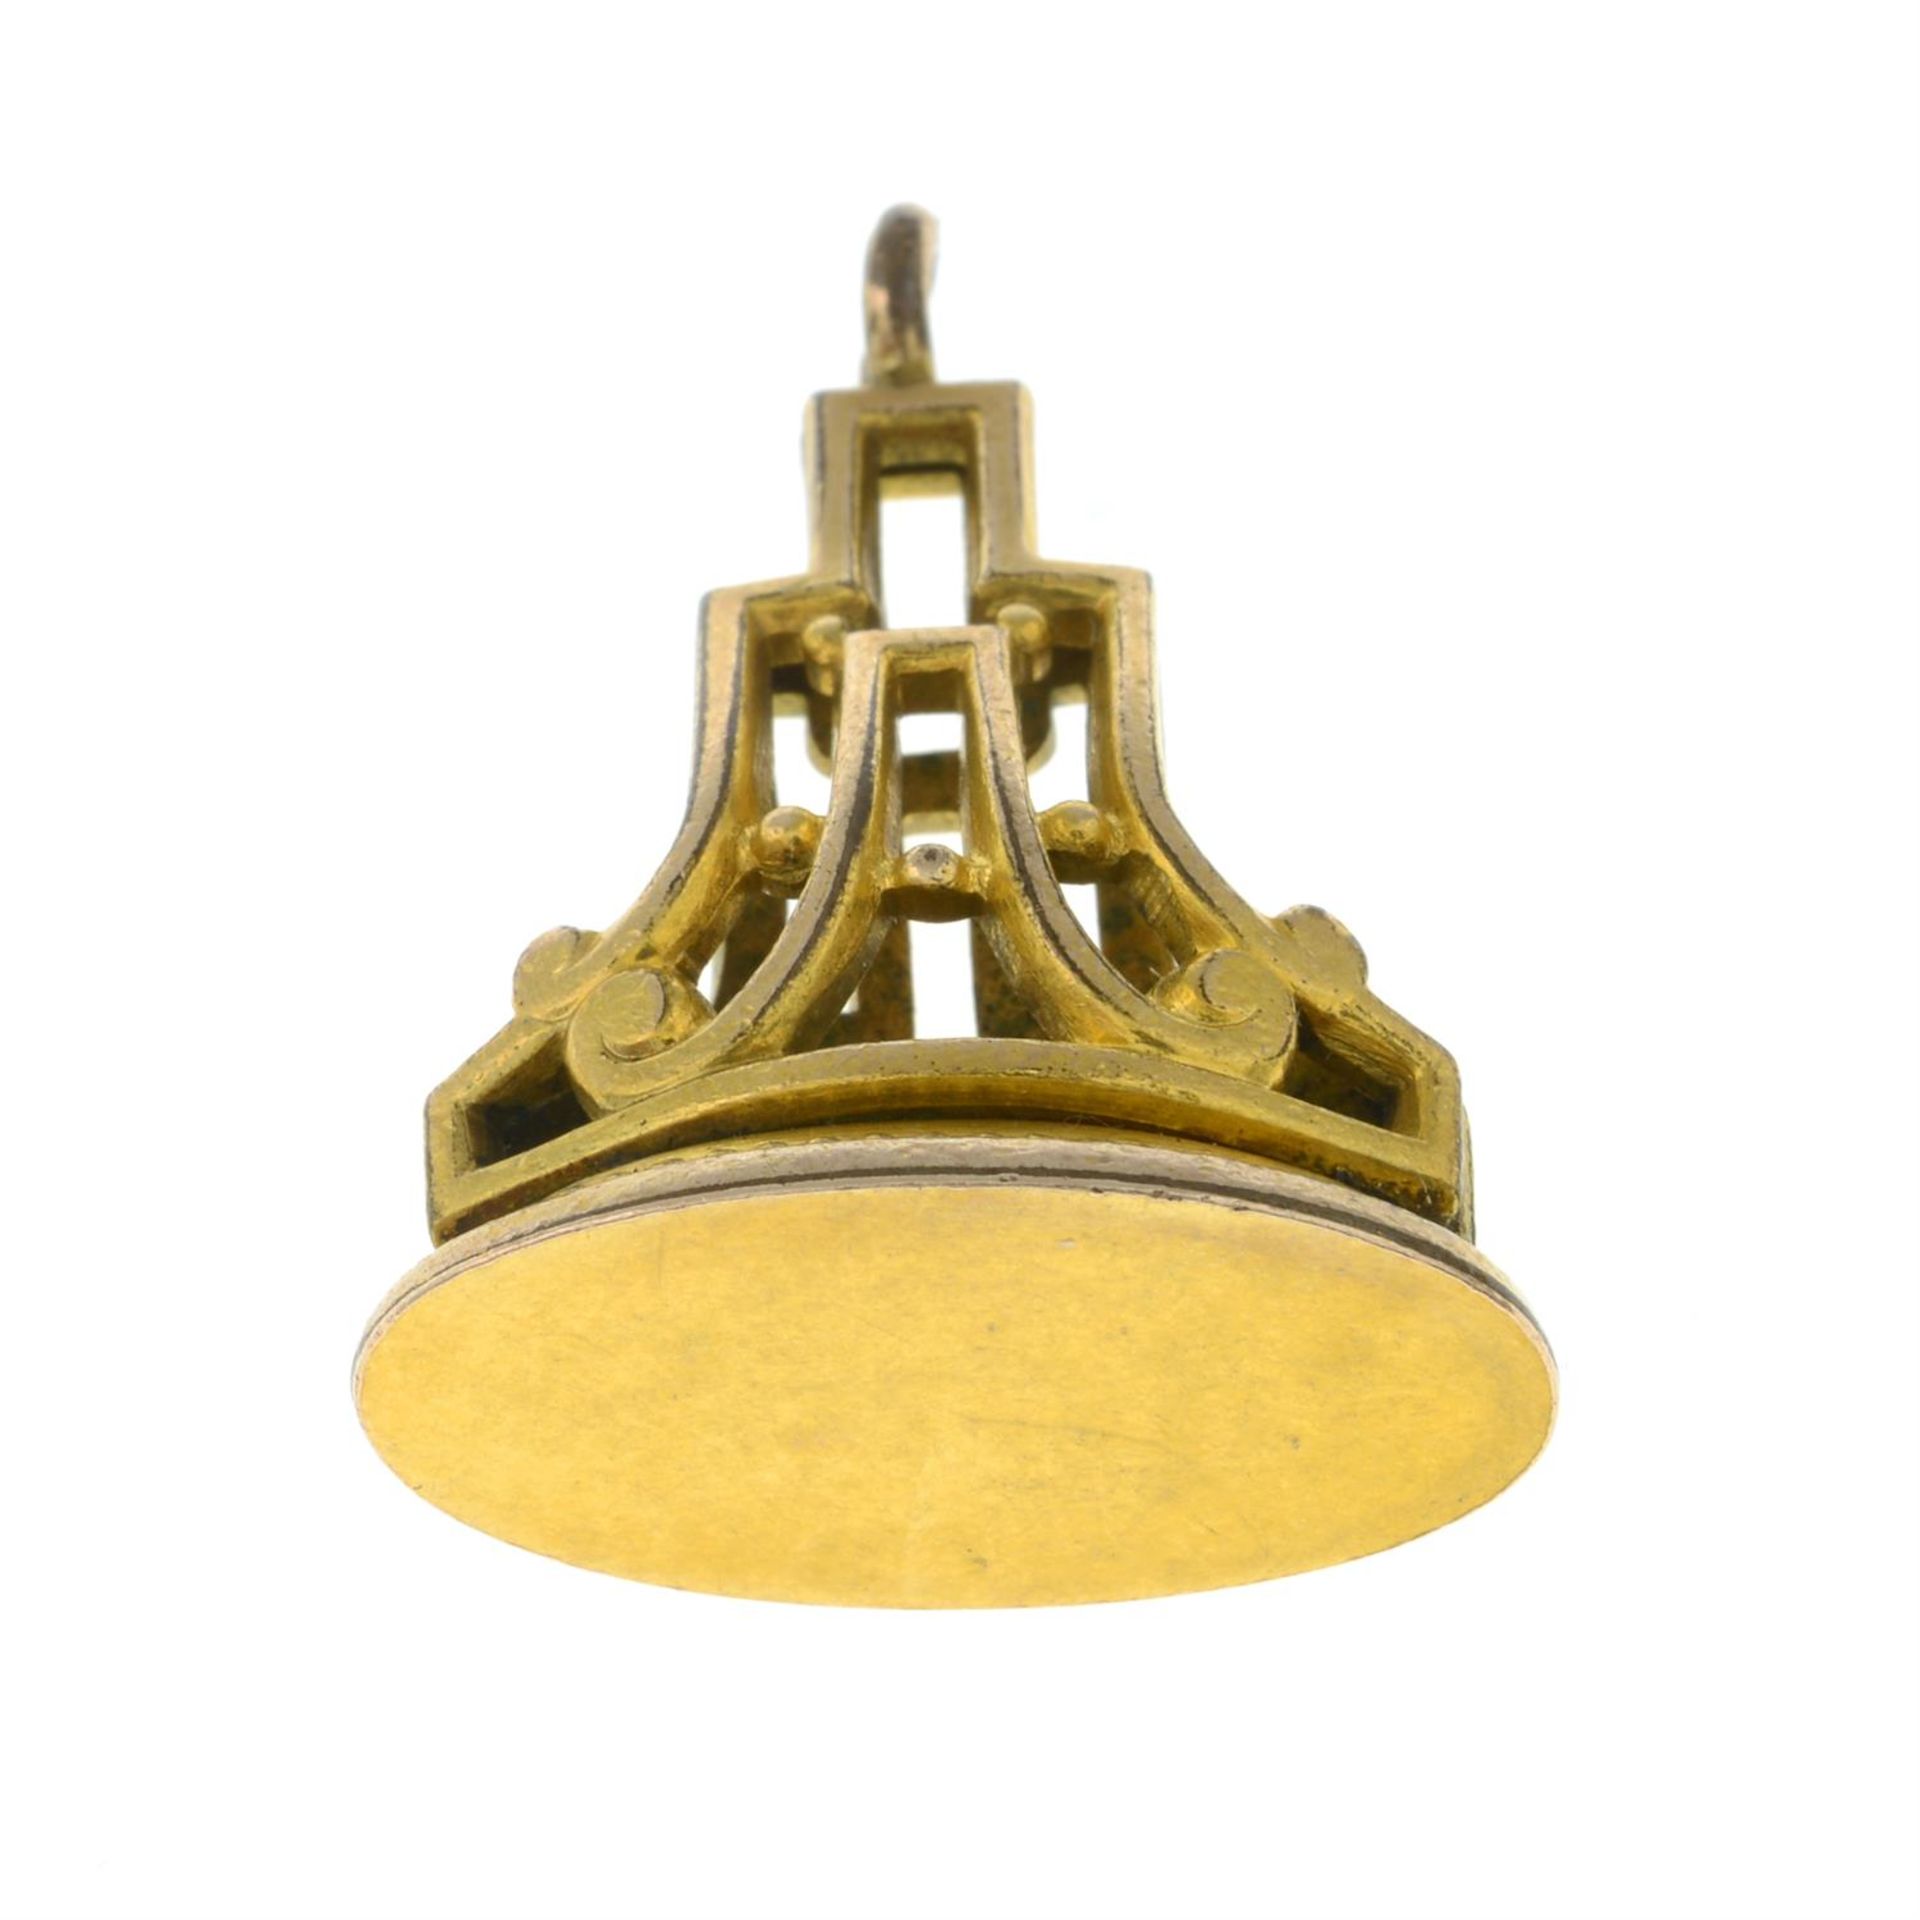 An early 20th century fob.